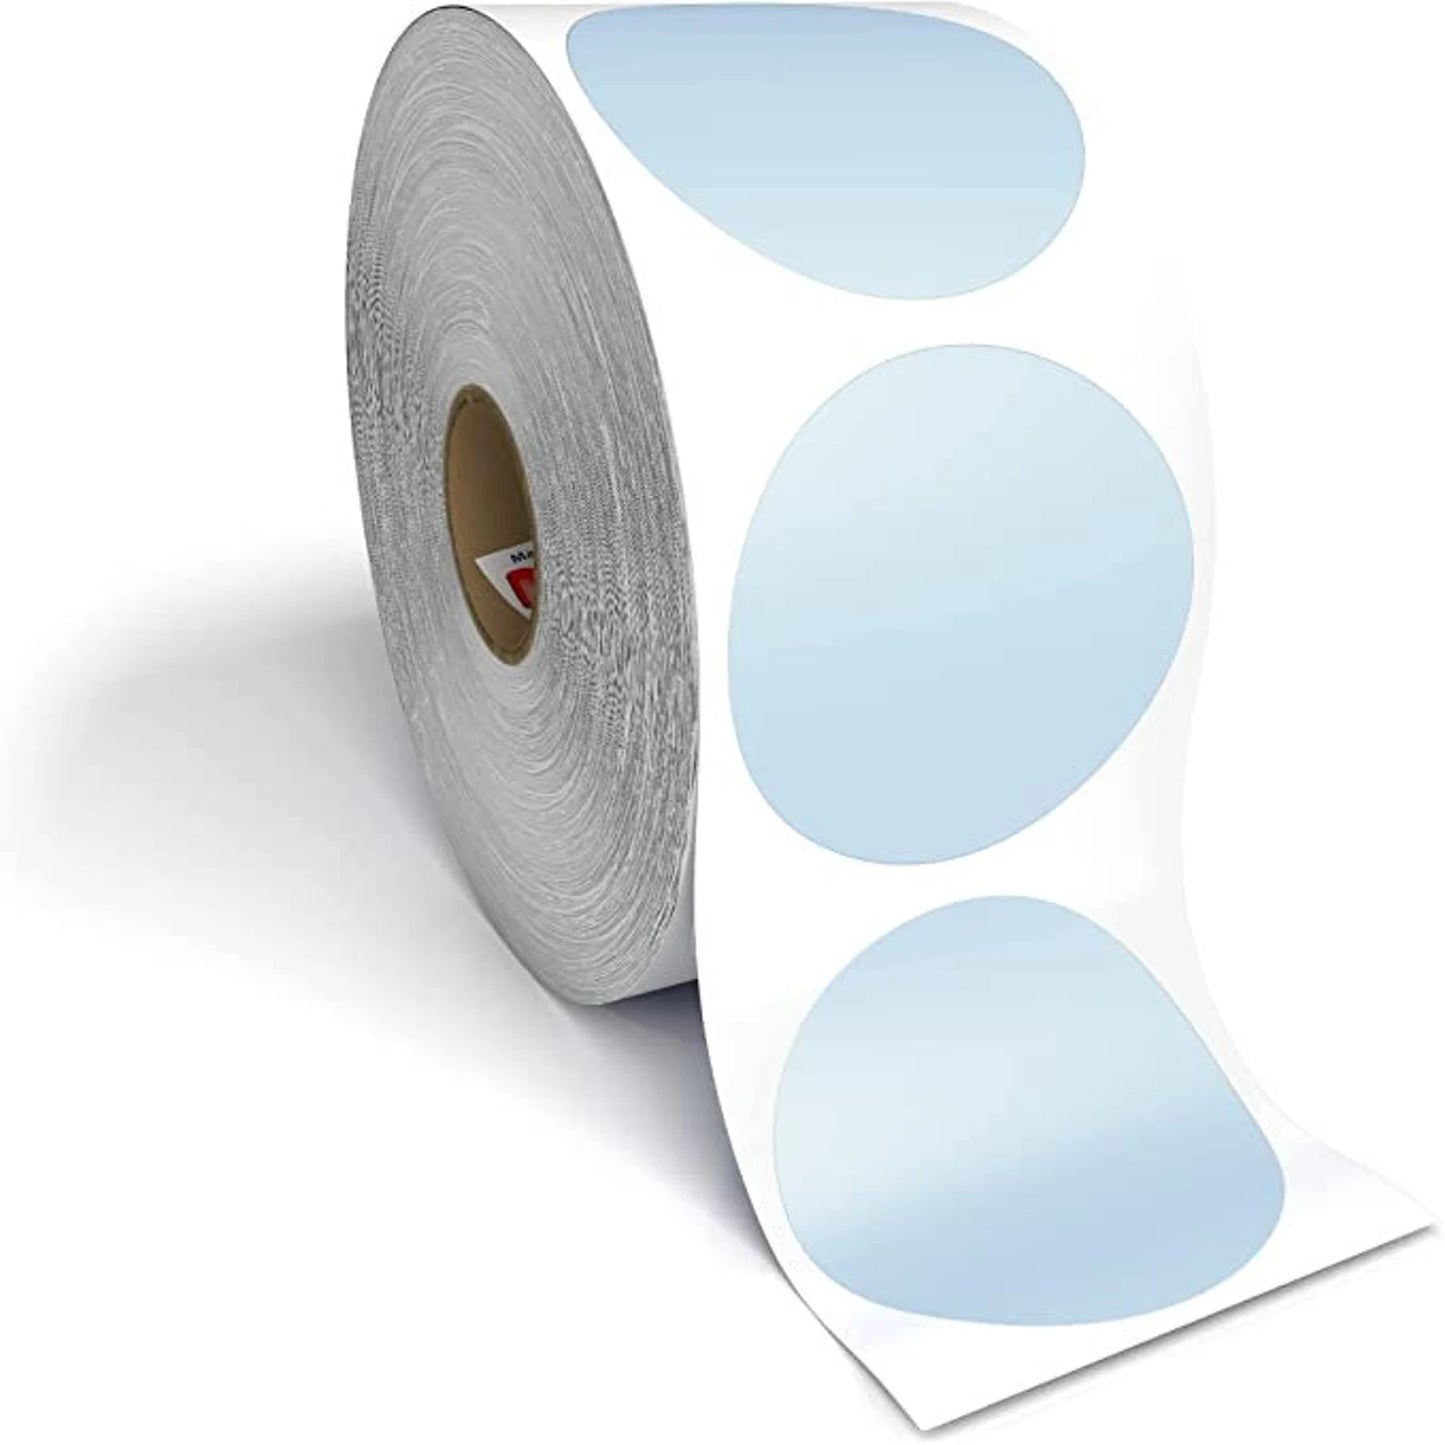 Custom Personalized Thermal Printed Labels